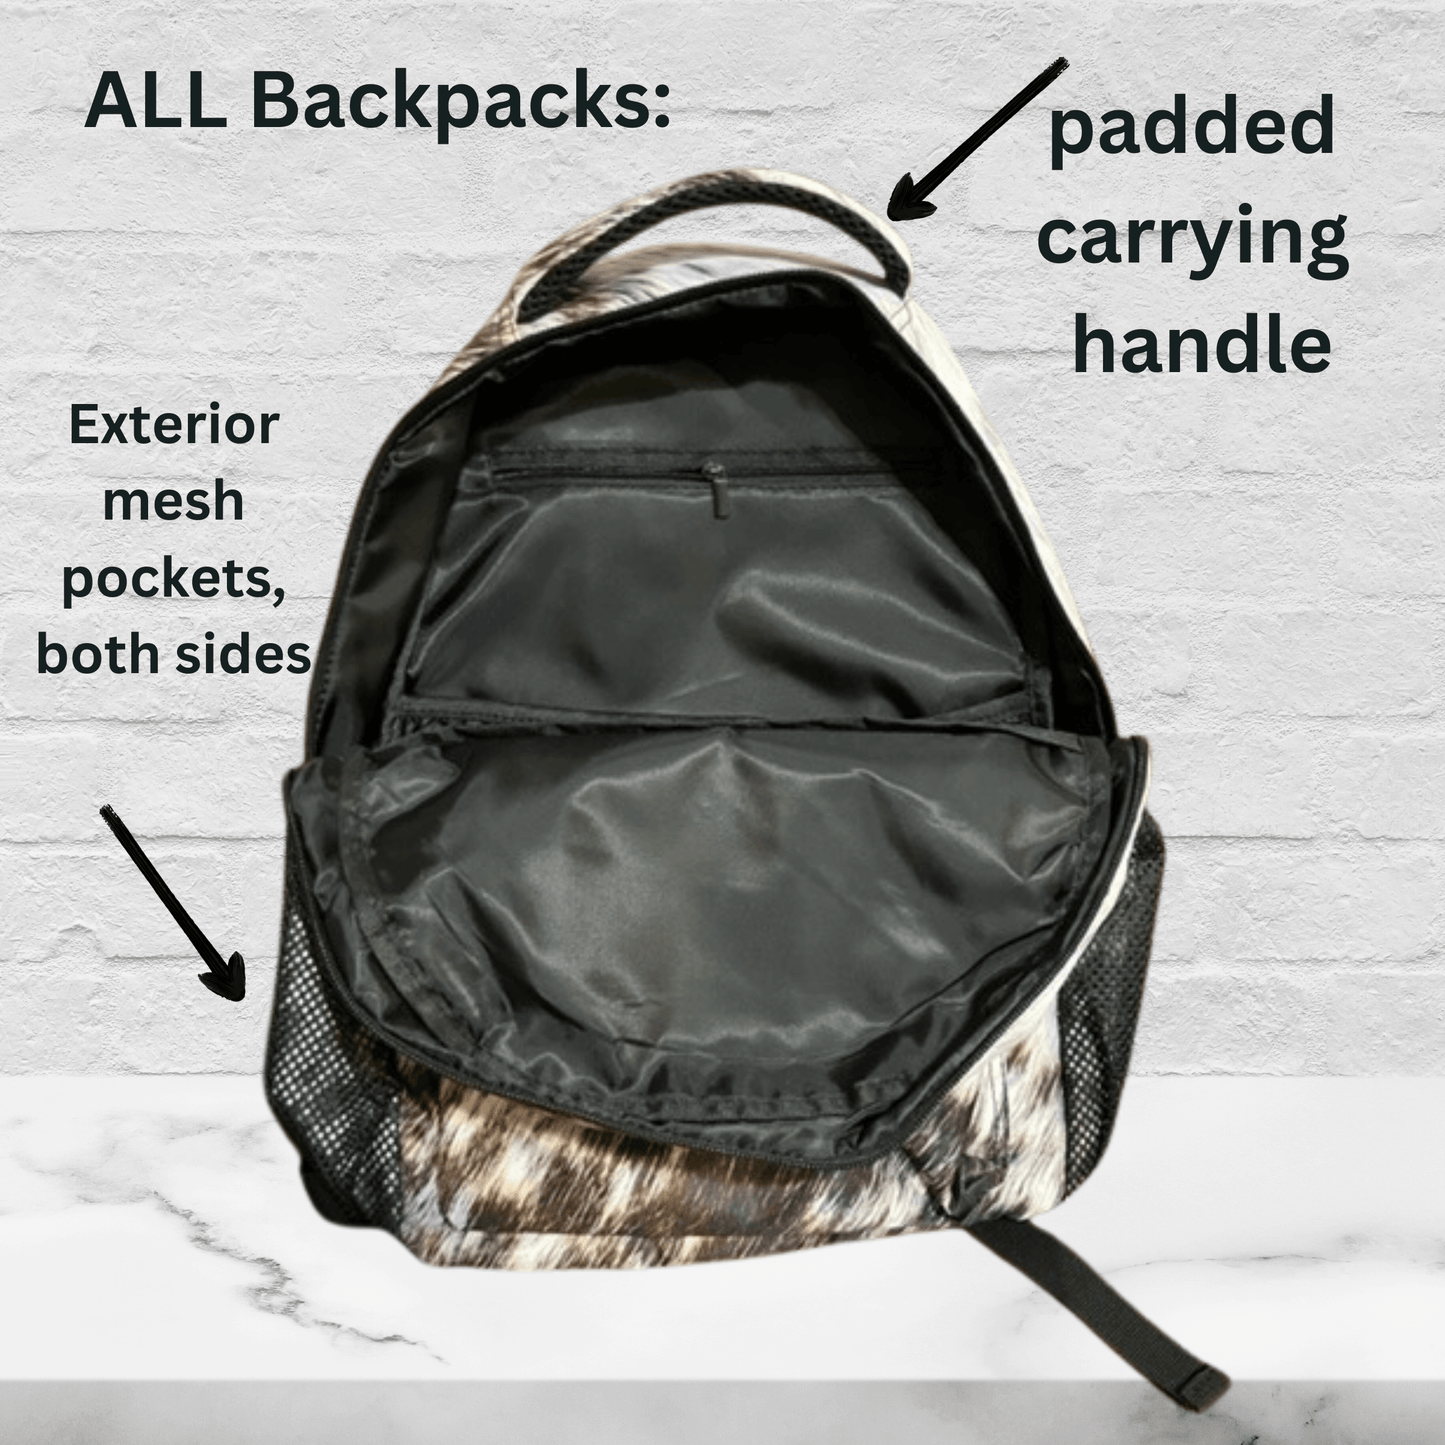 The inside look of the backpack and the padded carrying handle and mesh pockets on the exterior of the carry all bag for her.